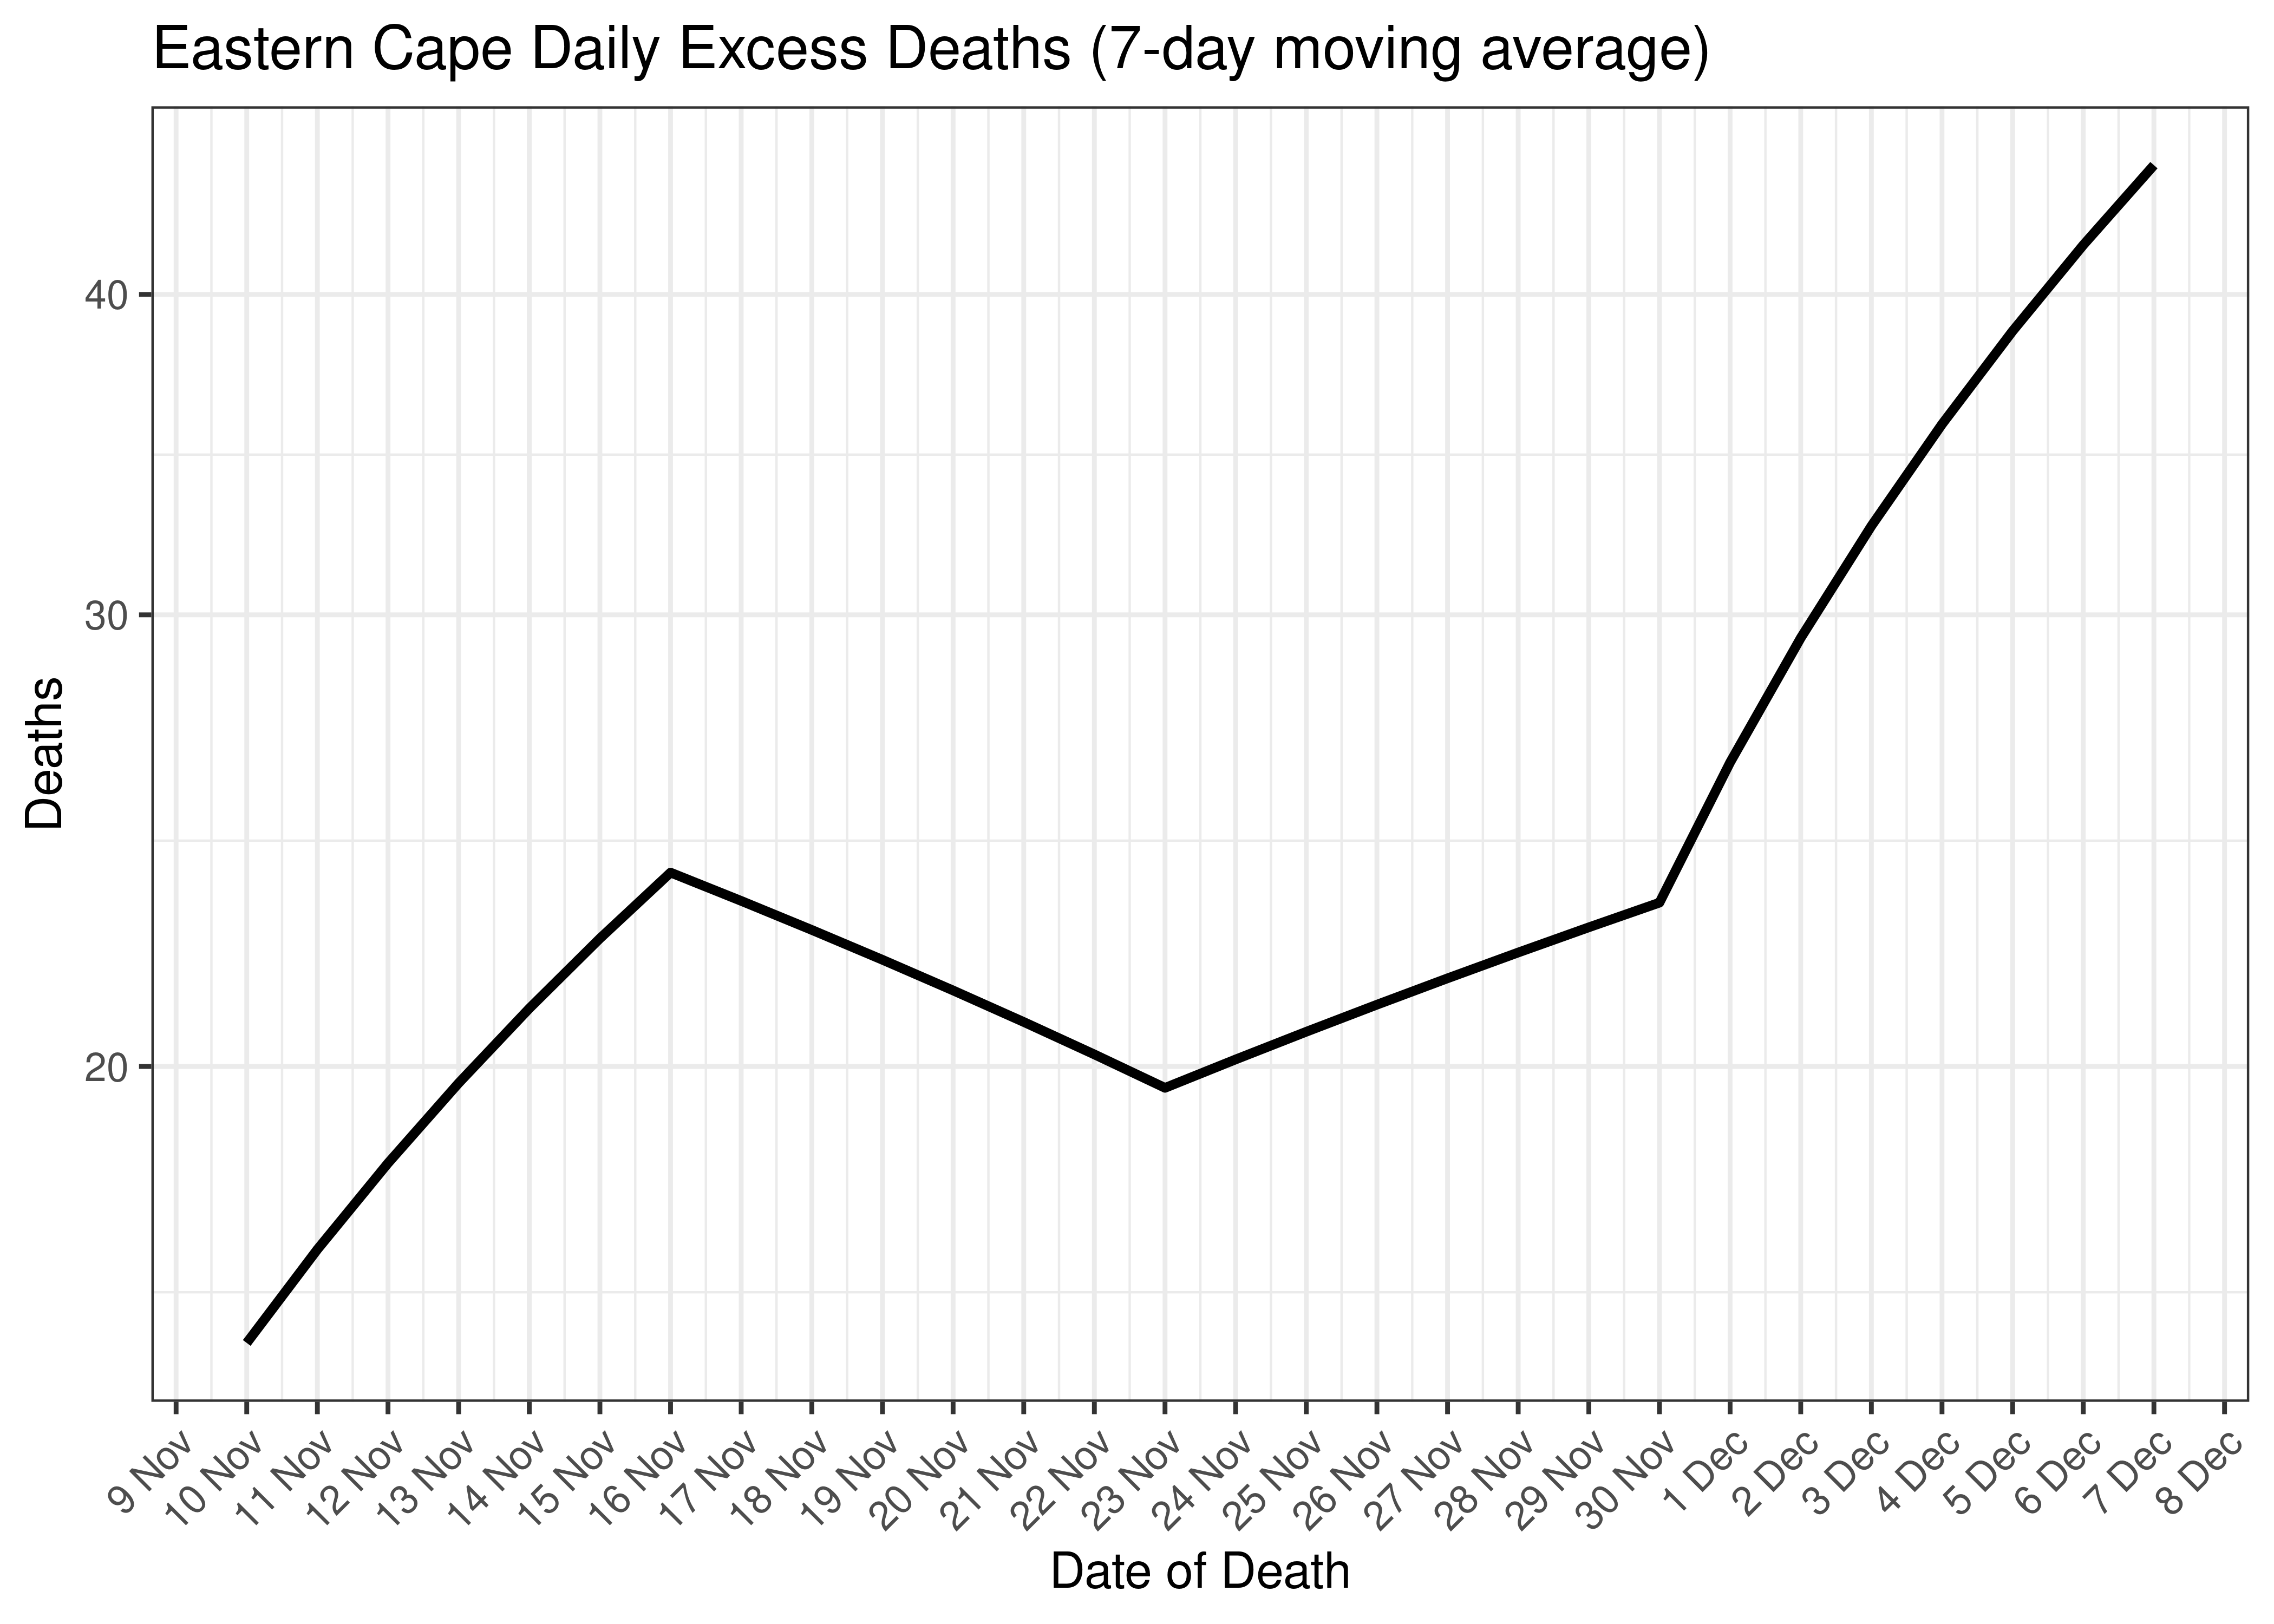 Eastern Cape Daily Excess Deaths for Last 30-days (7-day moving average)